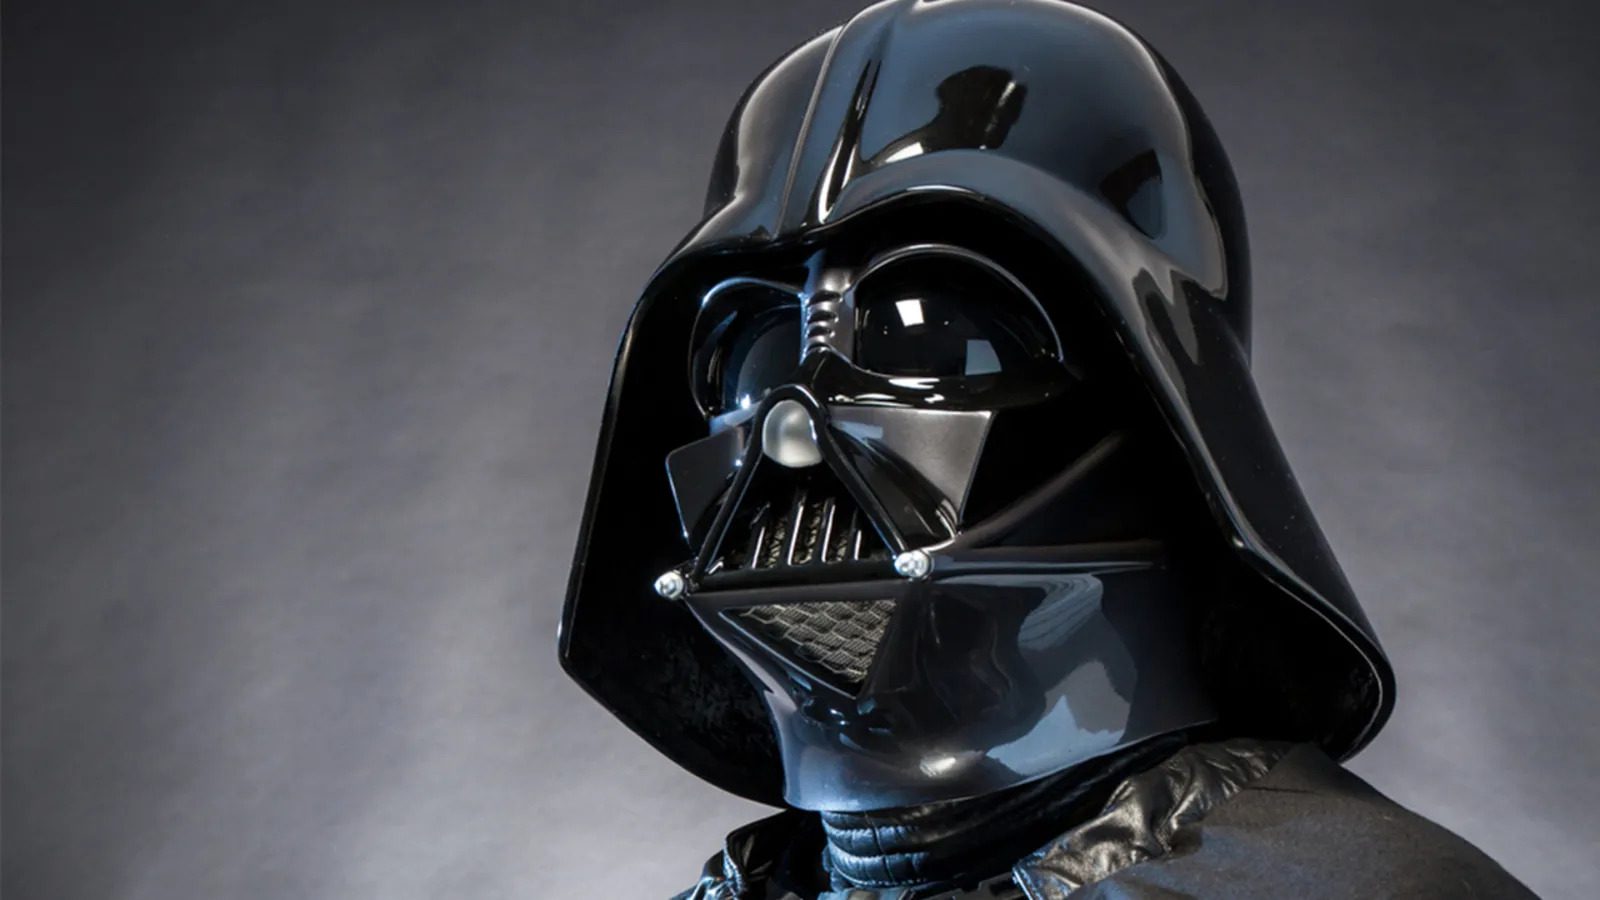 Darth Vader's original voice will be AI-generated from now on